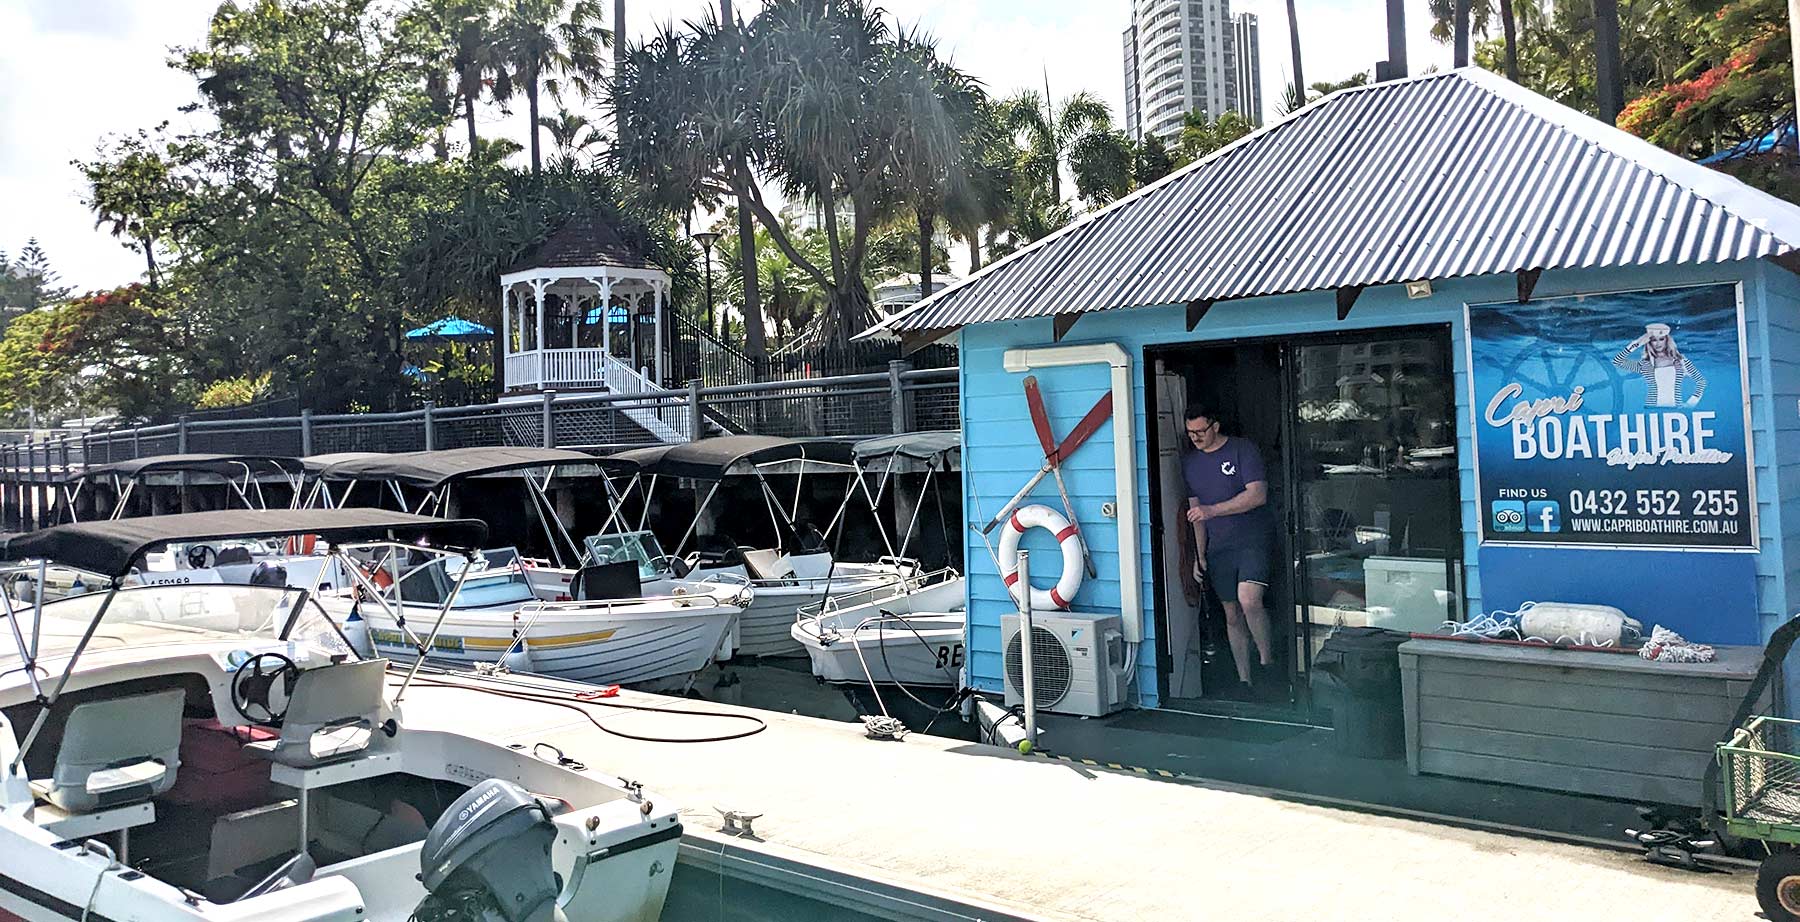 Capri Boat Hire office on the Nerang River behind the Marriott Hotel Surfers Paradise